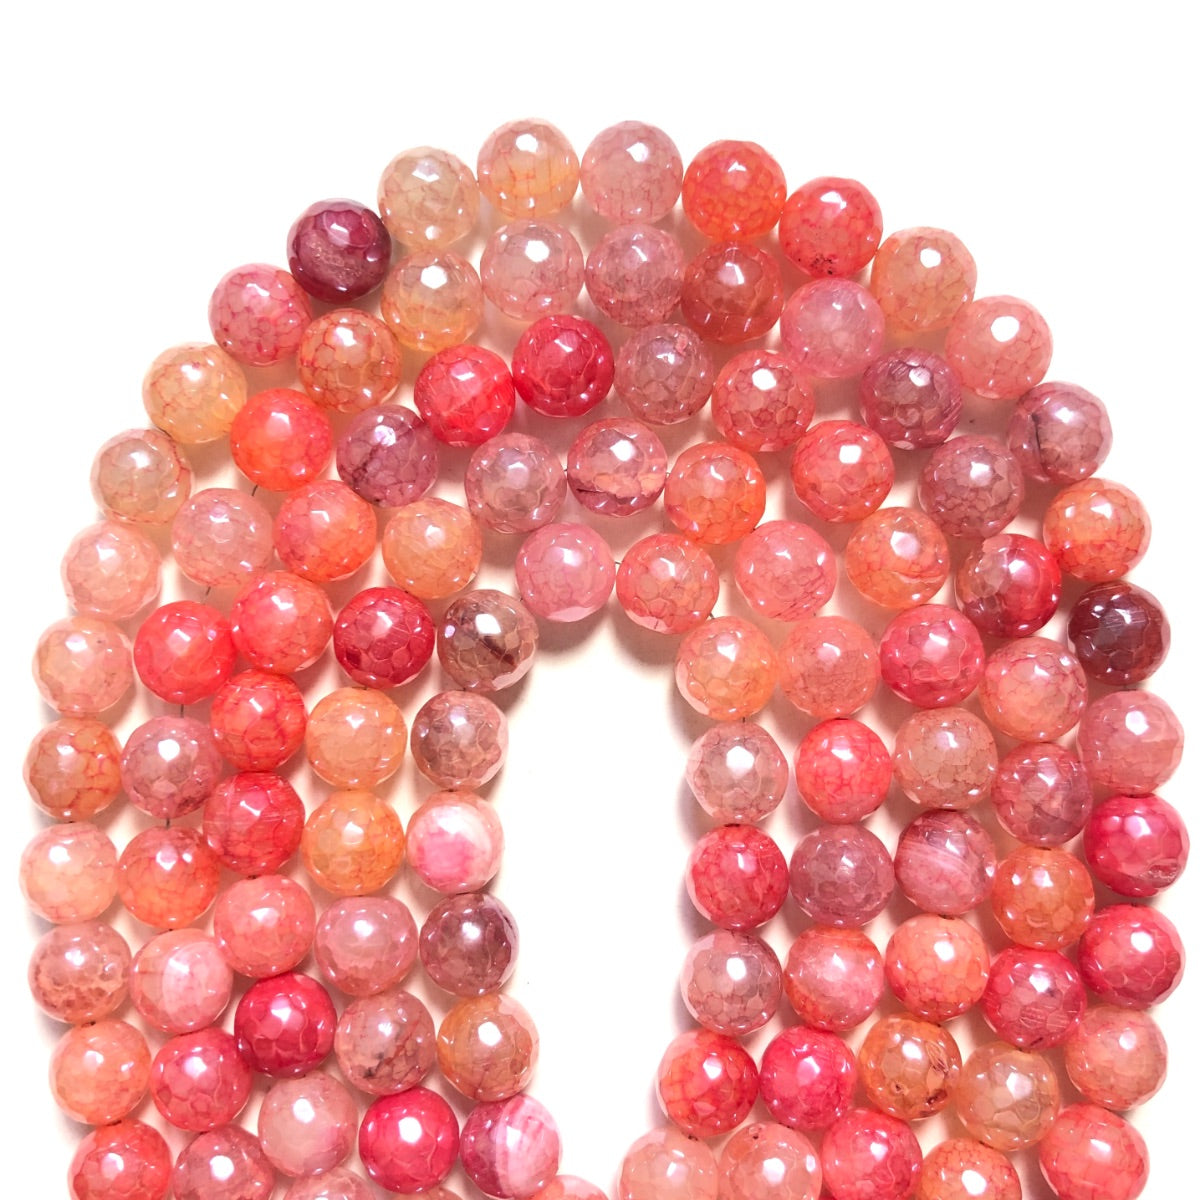 2 Strands/lot 10mm Electroplated Pink Agate Faceted Stone Beads Electroplated Beads Breast Cancer Awareness Electroplated Faceted Agate Beads New Beads Arrivals Charms Beads Beyond